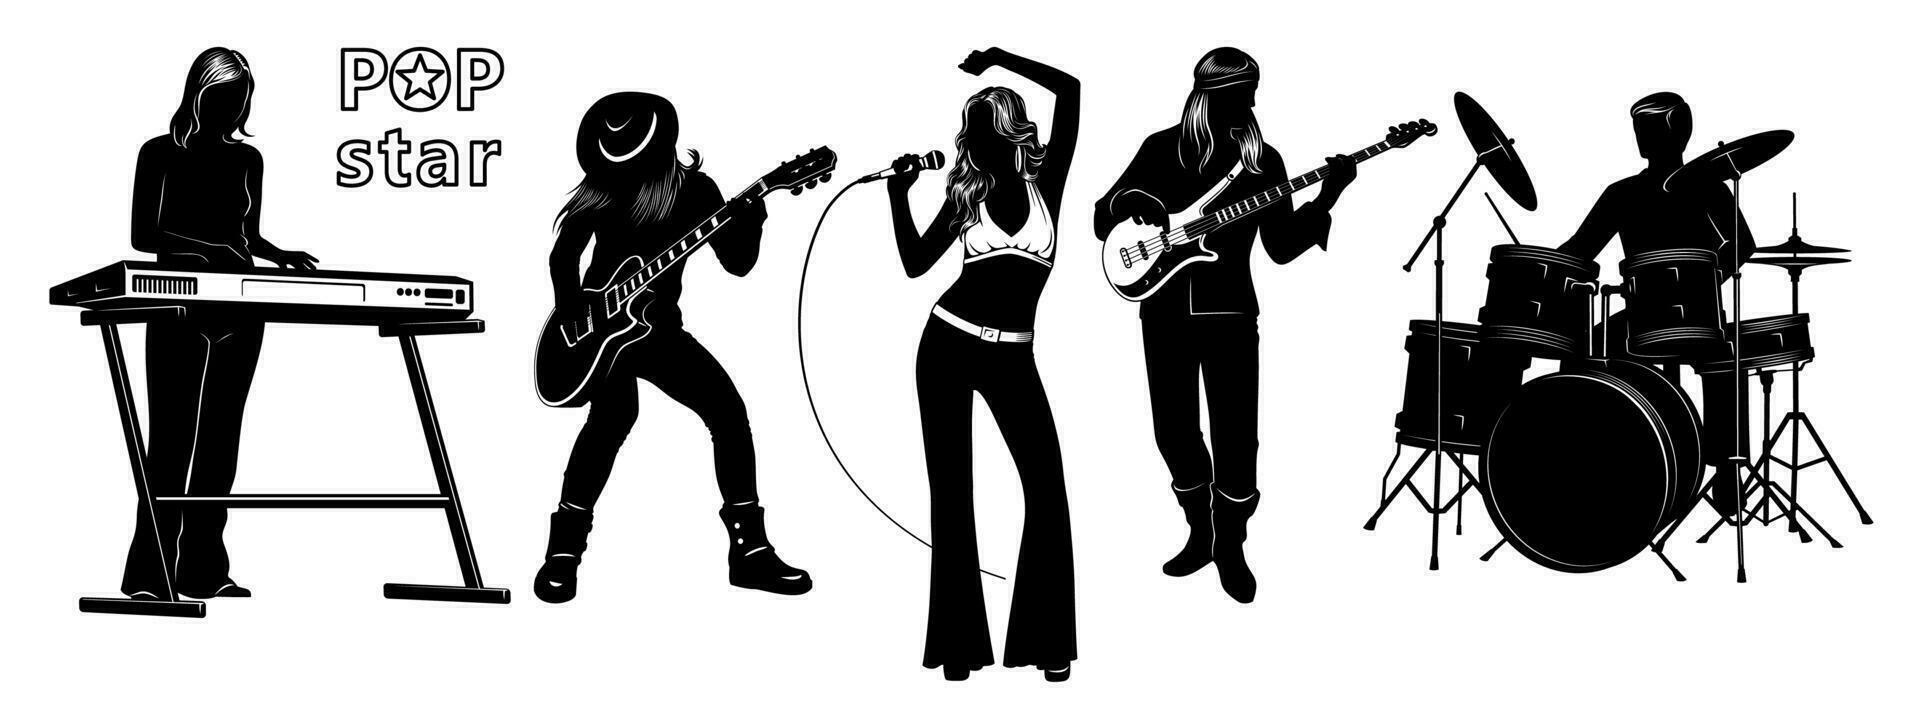 Silhouettes Set of Pop Singer Woman with Musicians. Keyboardist, Vocalist, Electric guitarist, Bass guitarist, Drummer. Vector cliparts isolated on white.